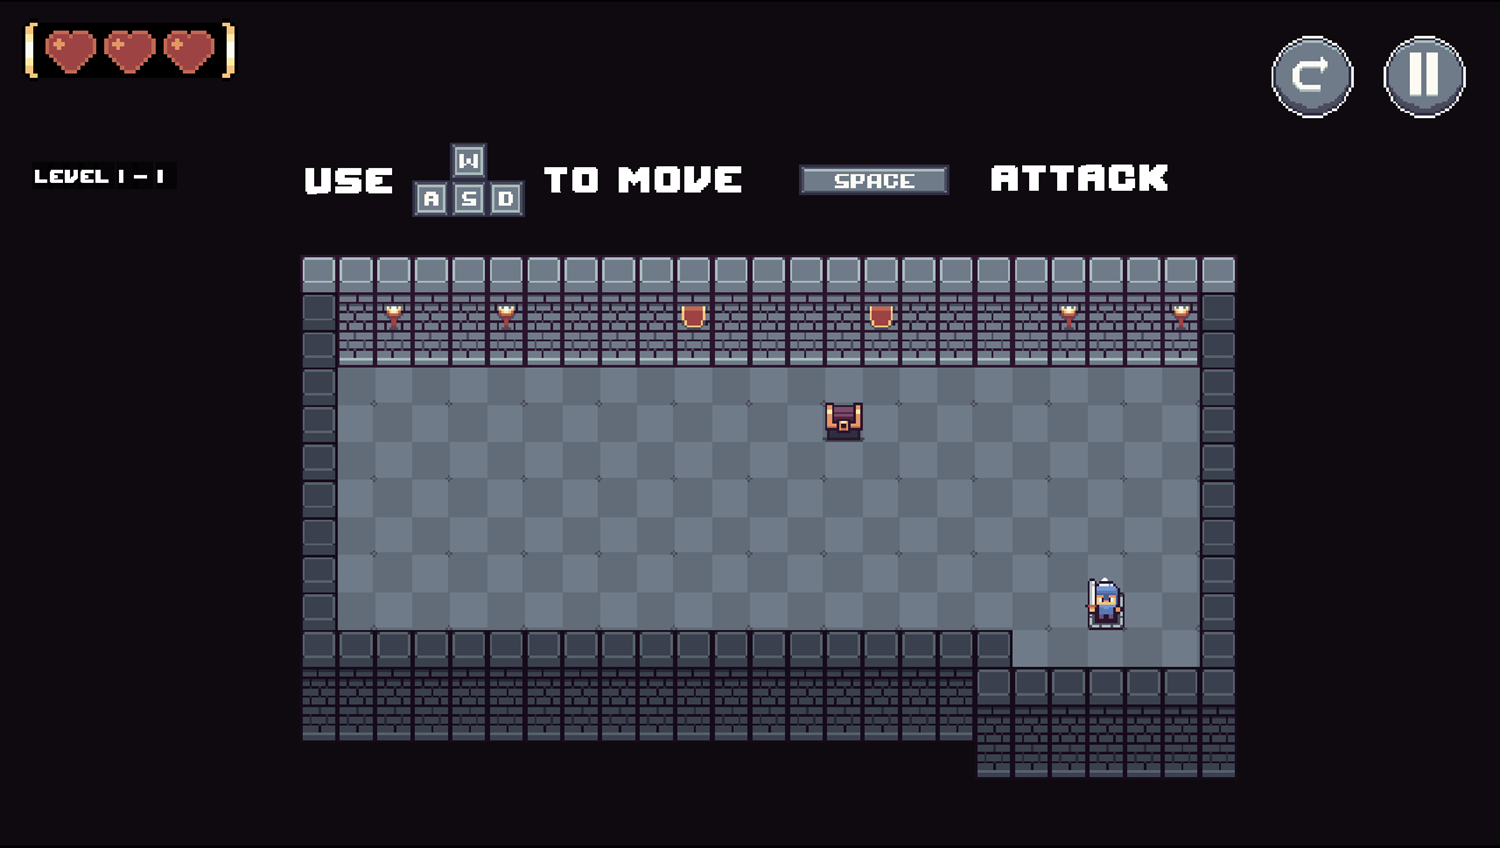 Sword Knight Game Level Complete Screenshot.